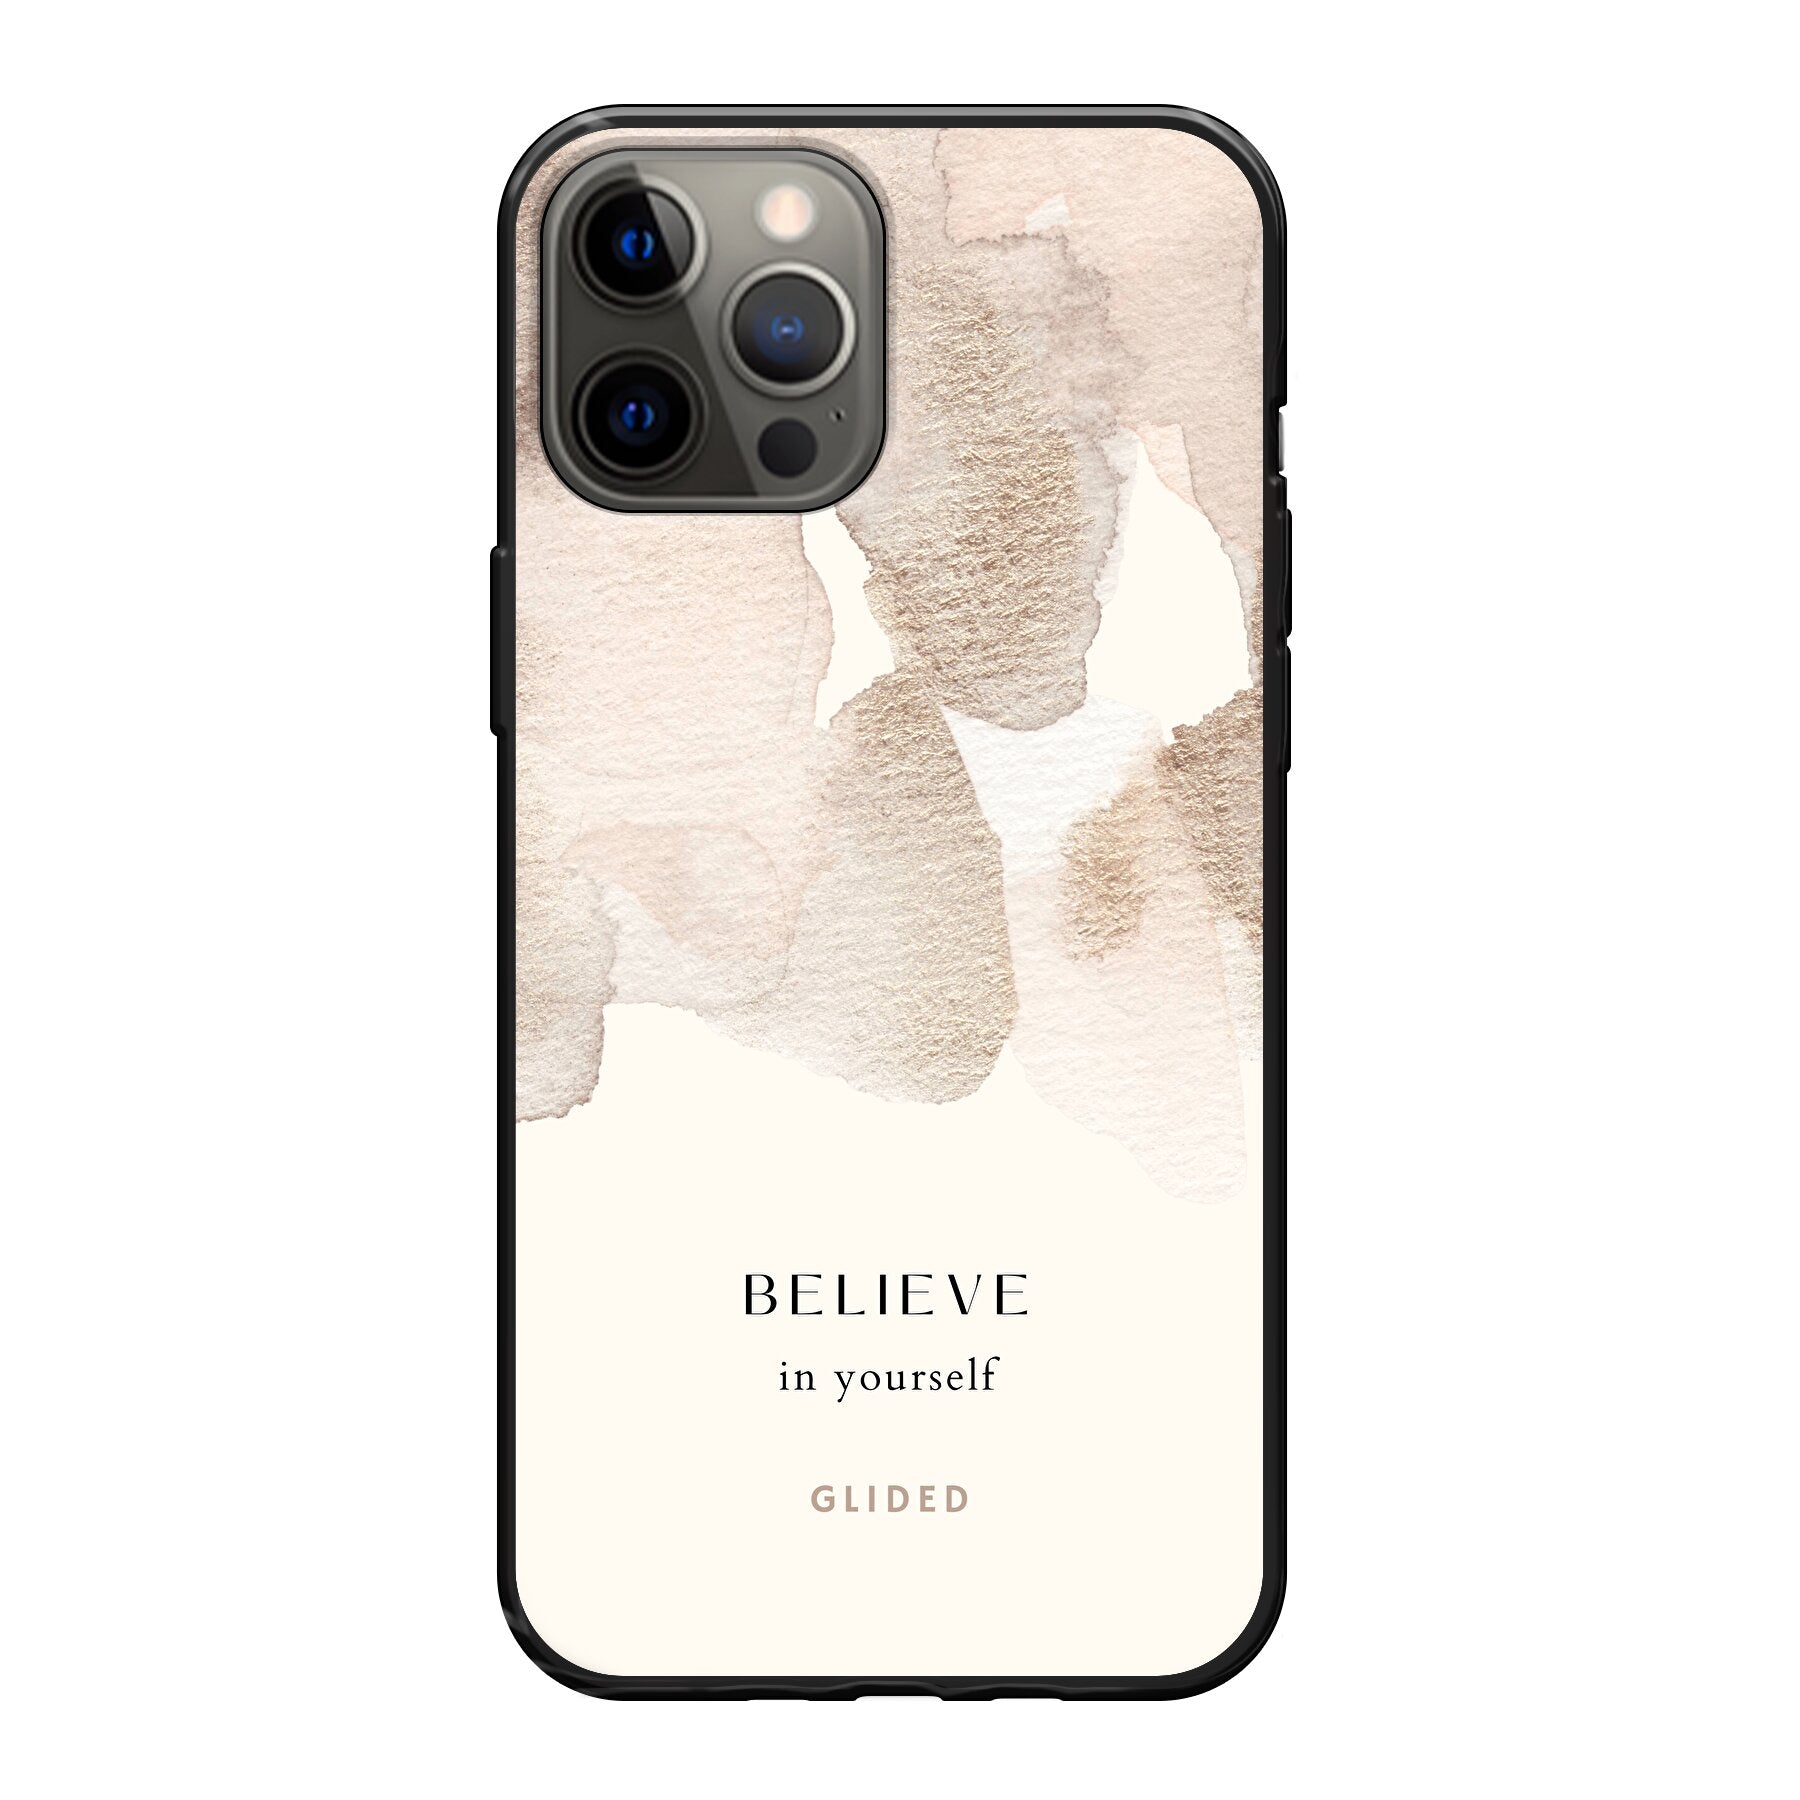 Believe in yourself - iPhone 12 Pro Max Handyhülle Soft case